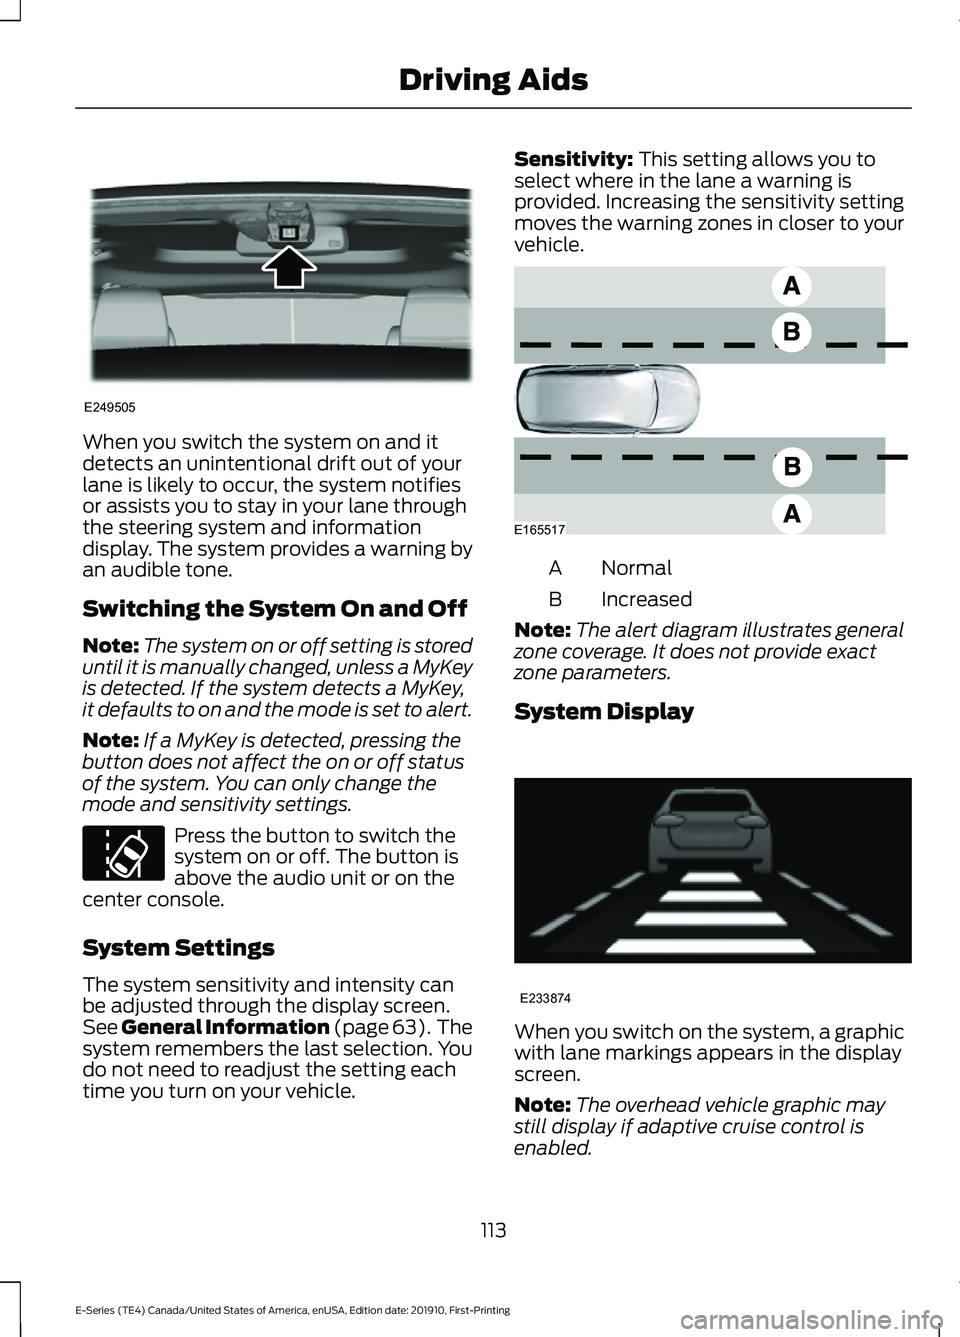 FORD E-350 2021 User Guide When you switch the system on and it
detects an unintentional drift out of your
lane is likely to occur, the system notifies
or assists you to stay in your lane through
the steering system and informa